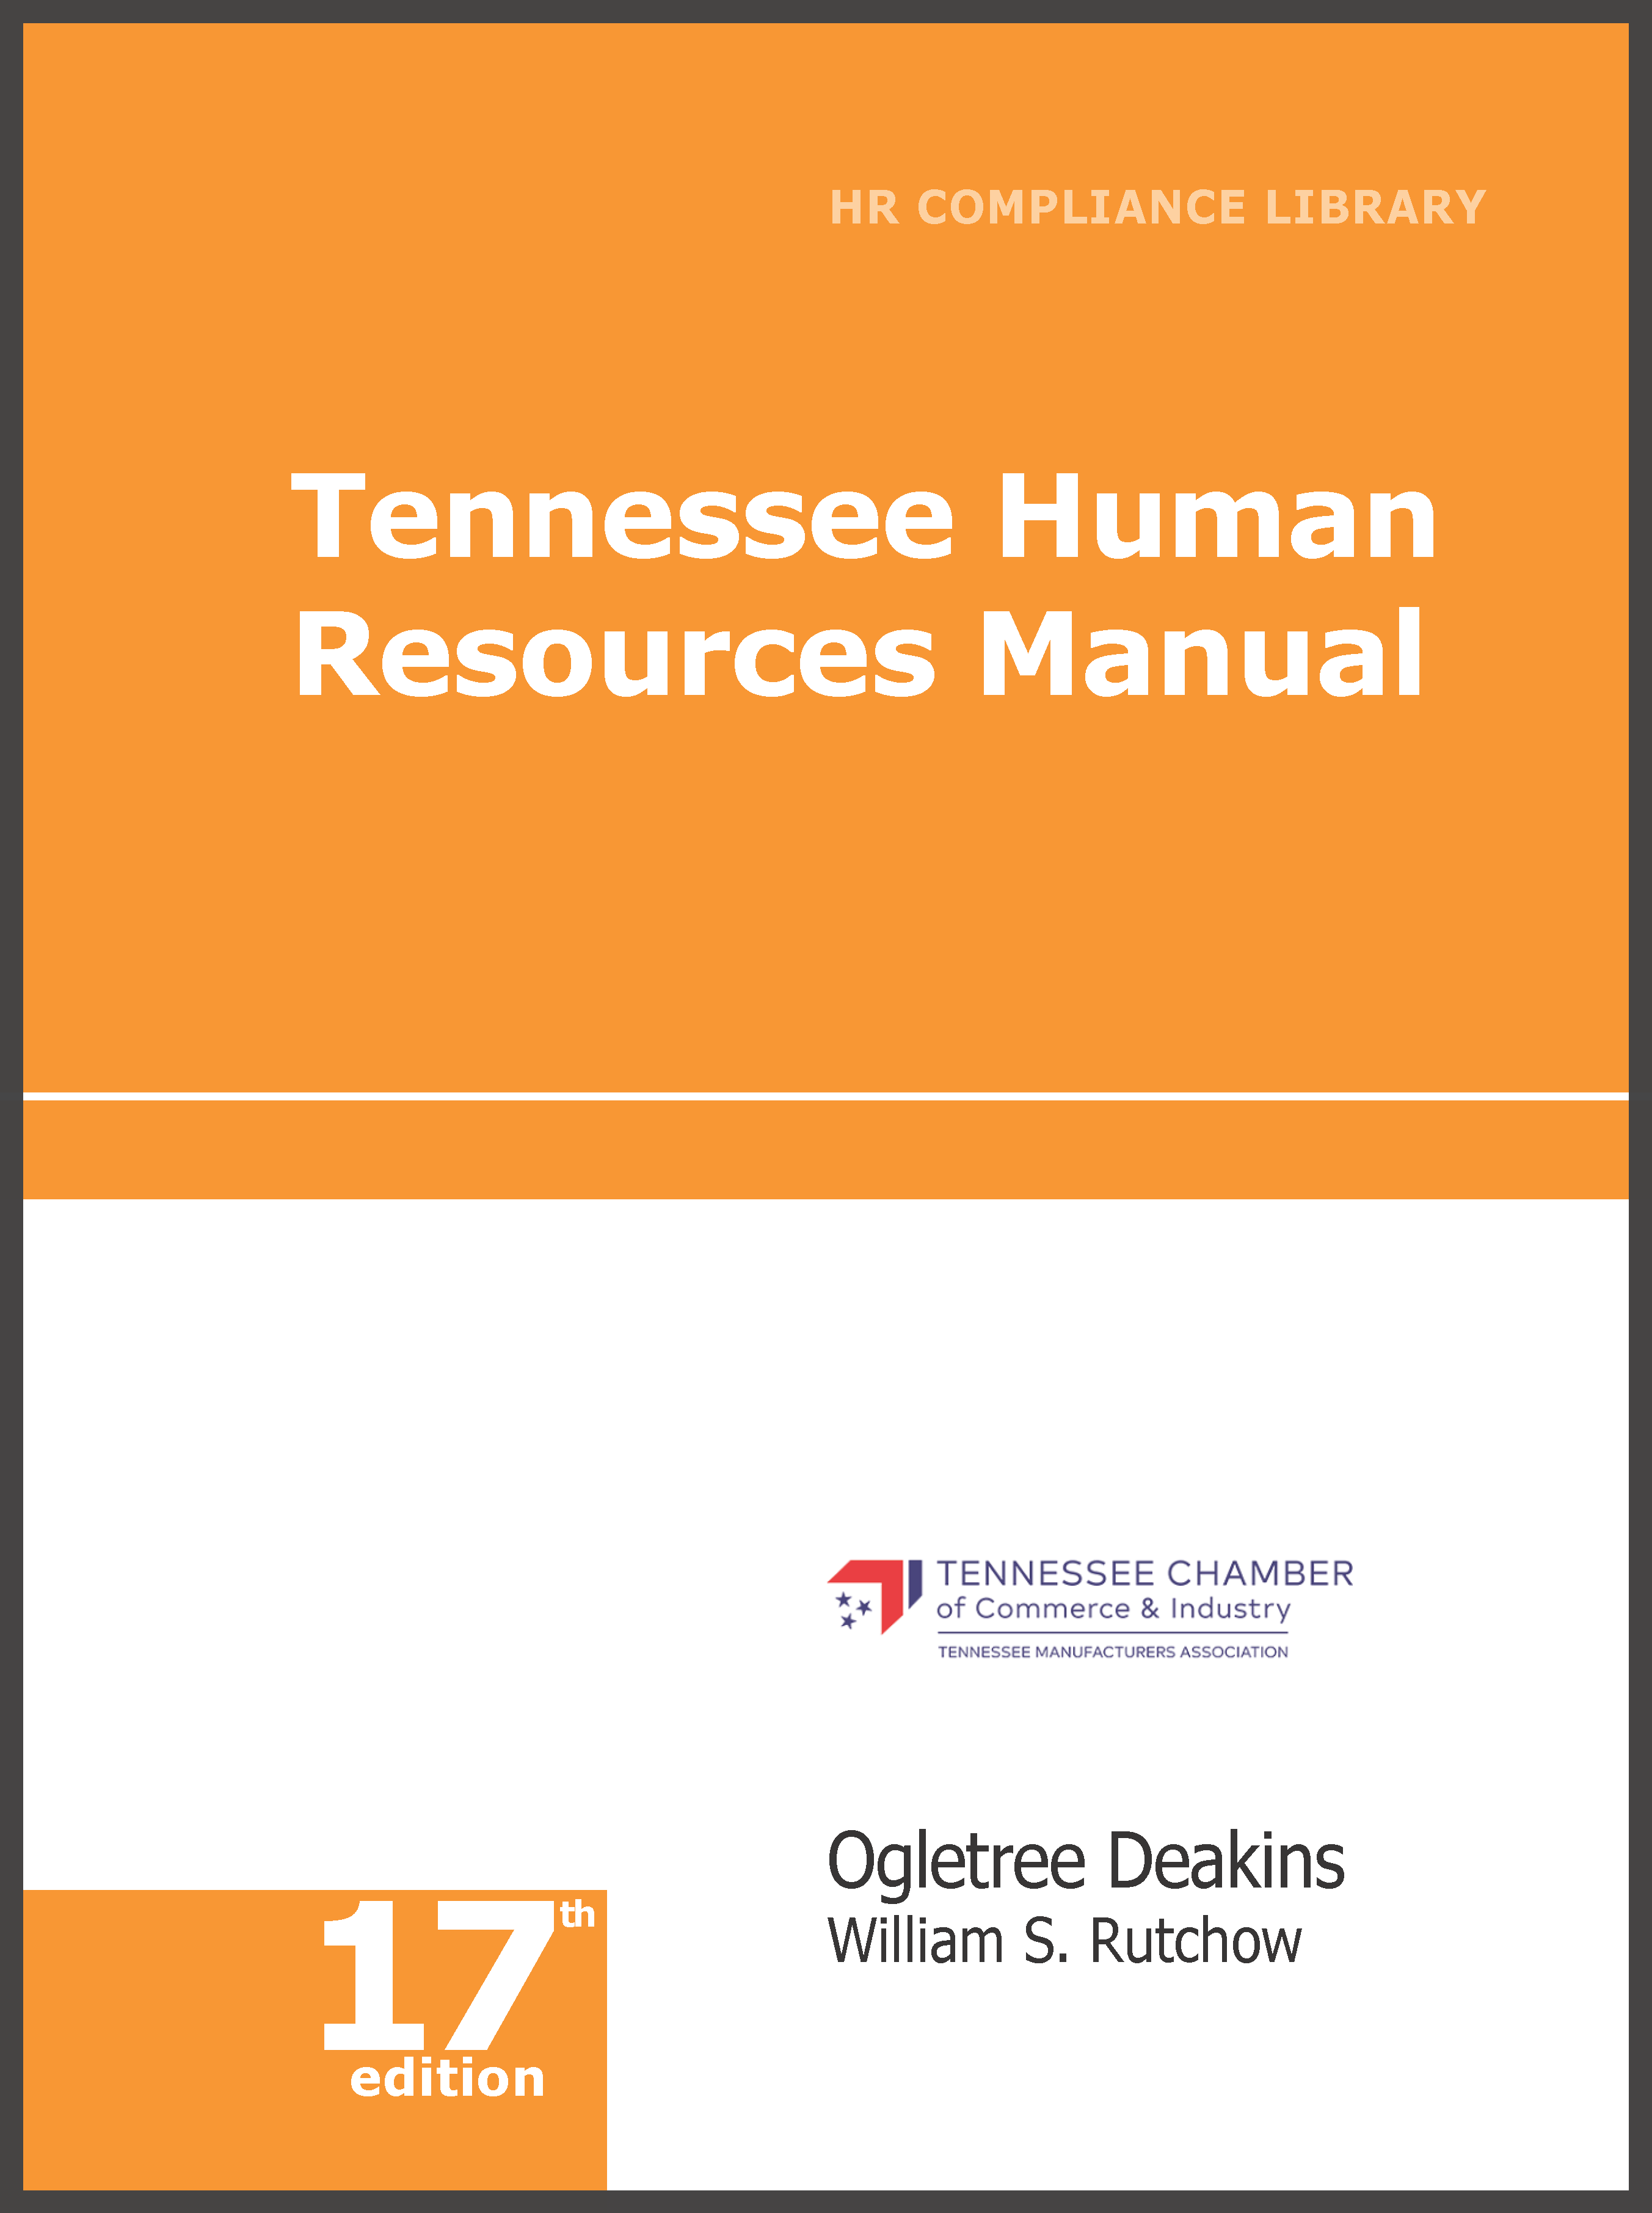 Tennessee Human Resources Library—Online Only employment law image, remote work, labor laws, employment laws, right to work, order of protection, minimum wage